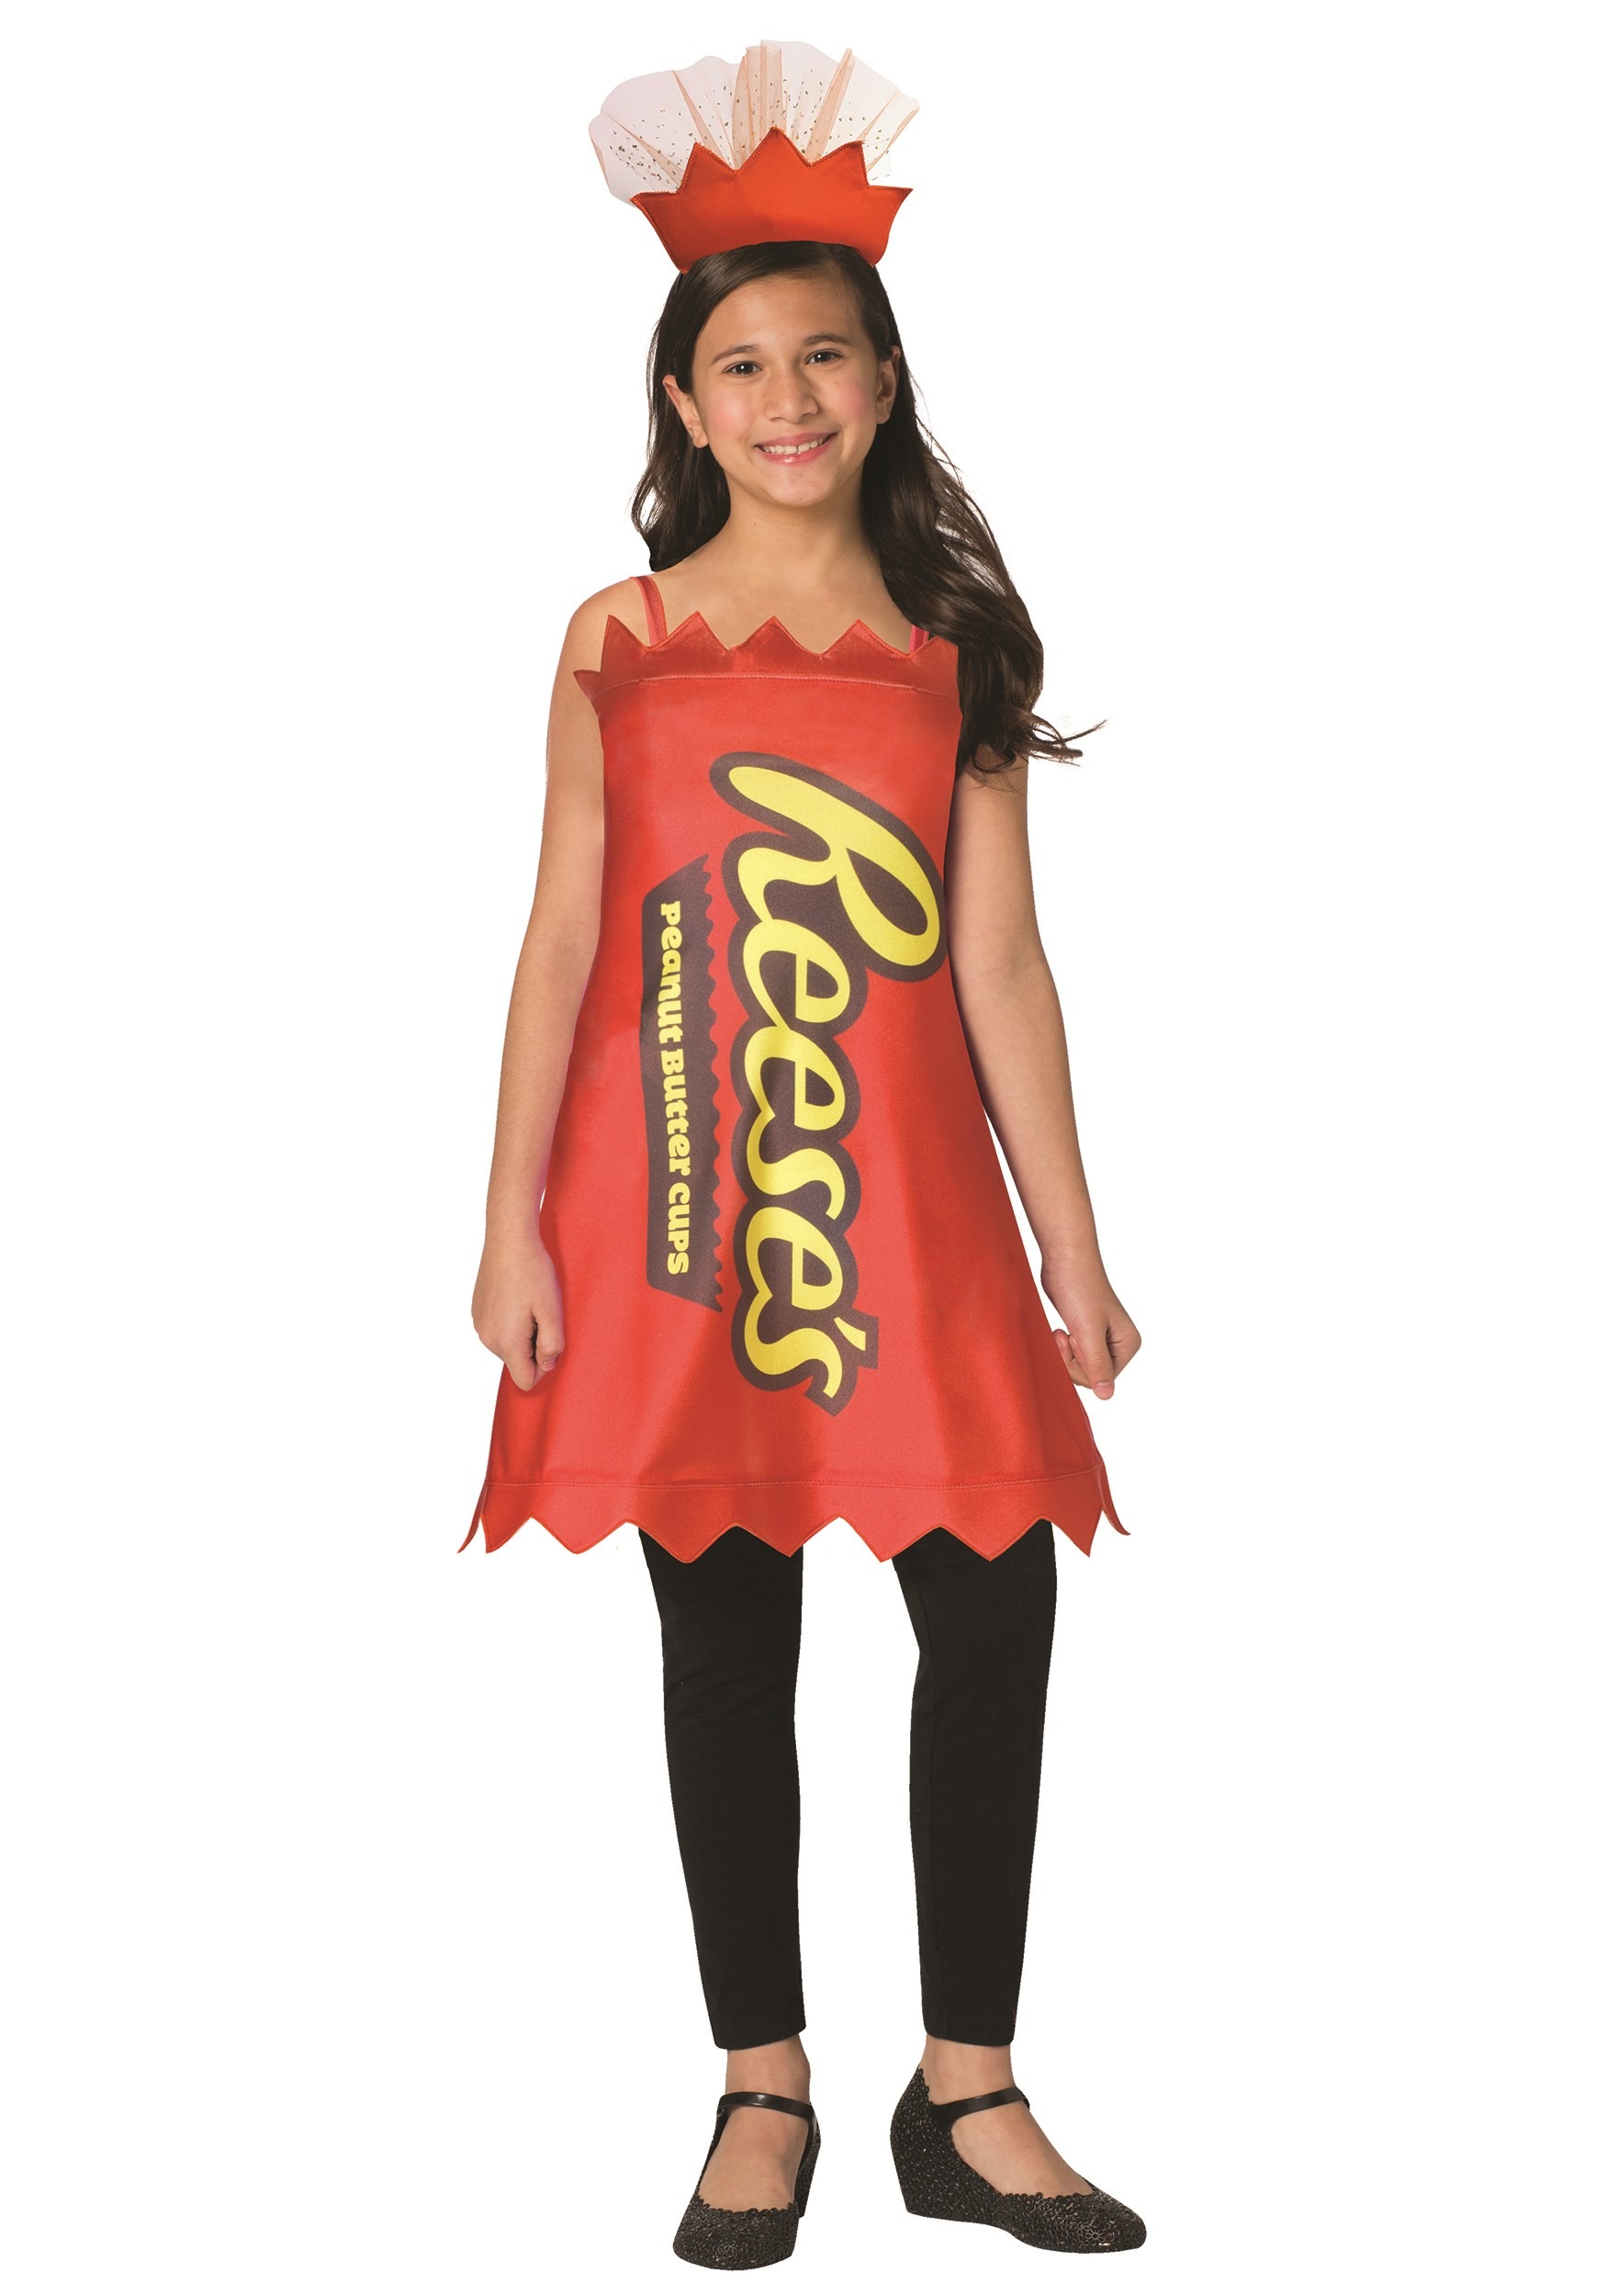 The Reese’s Girls Reese’s Cup Costume